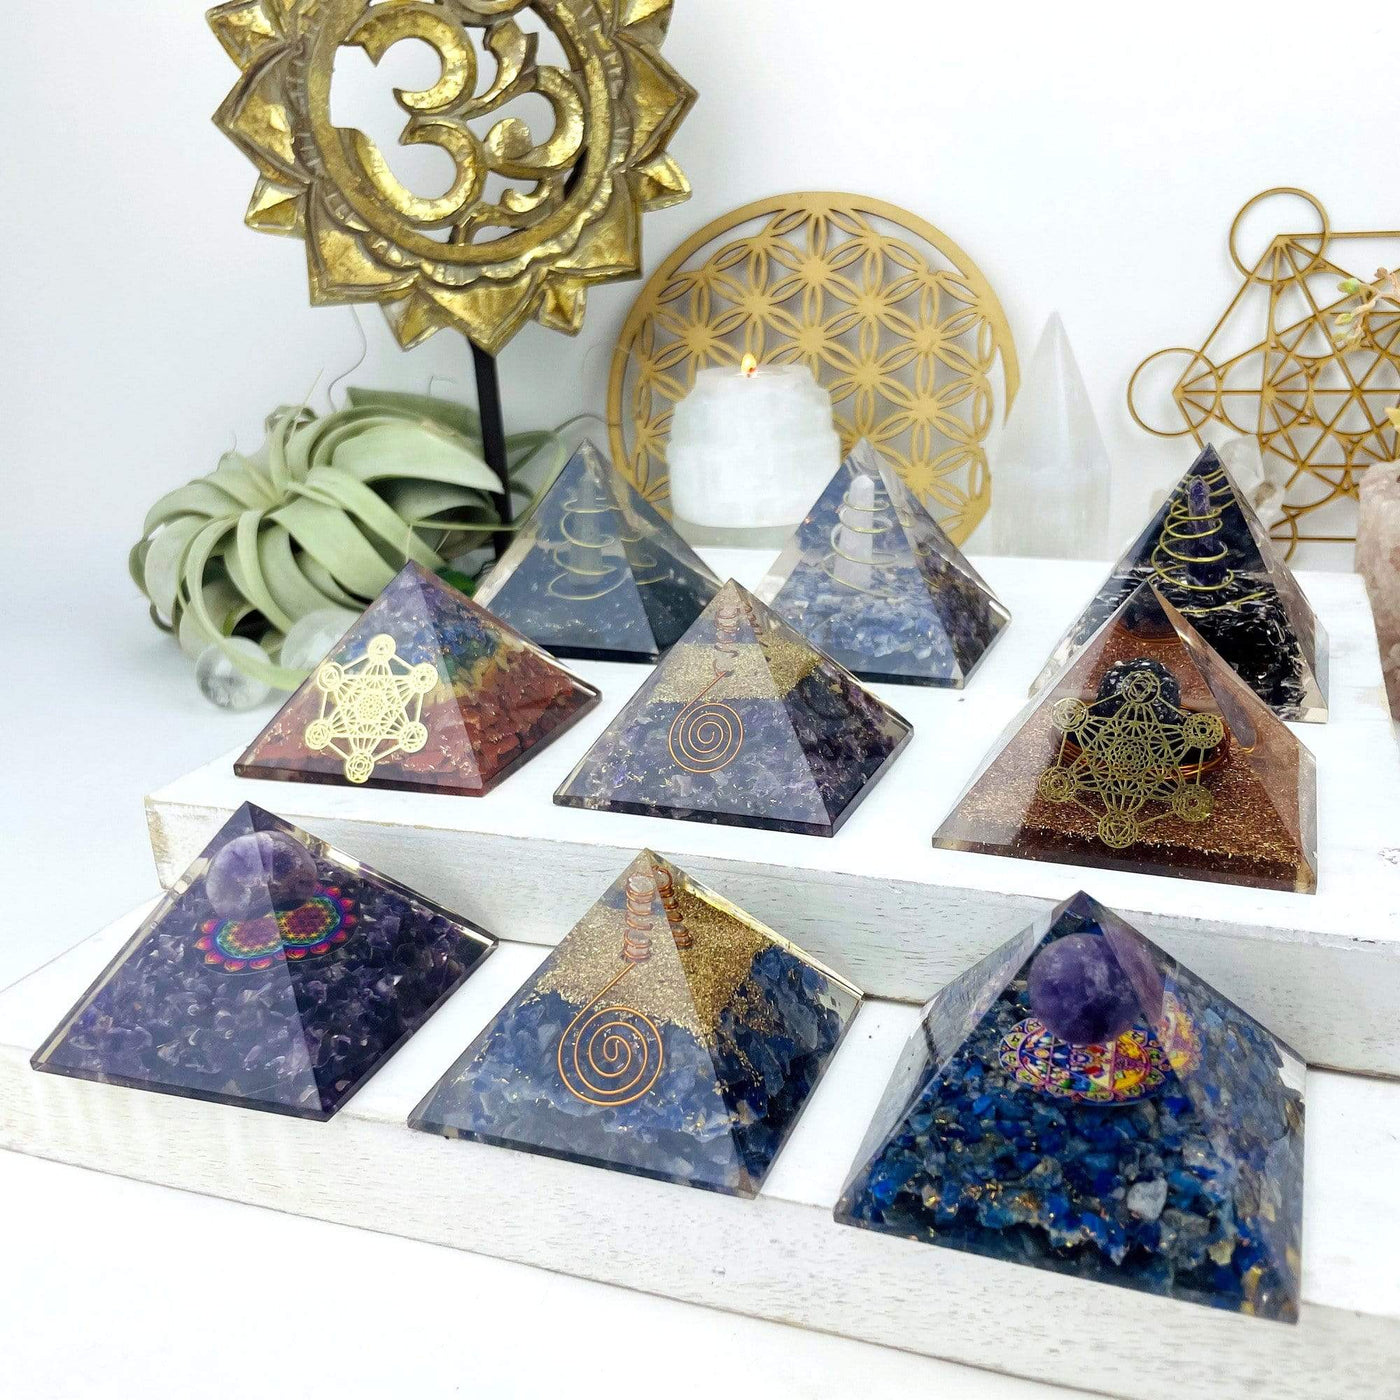 Orgone Amethyst with Crystal Point Pyramid - Chakra Reiki Metaphysical Pyramids - 9 in rows of 3